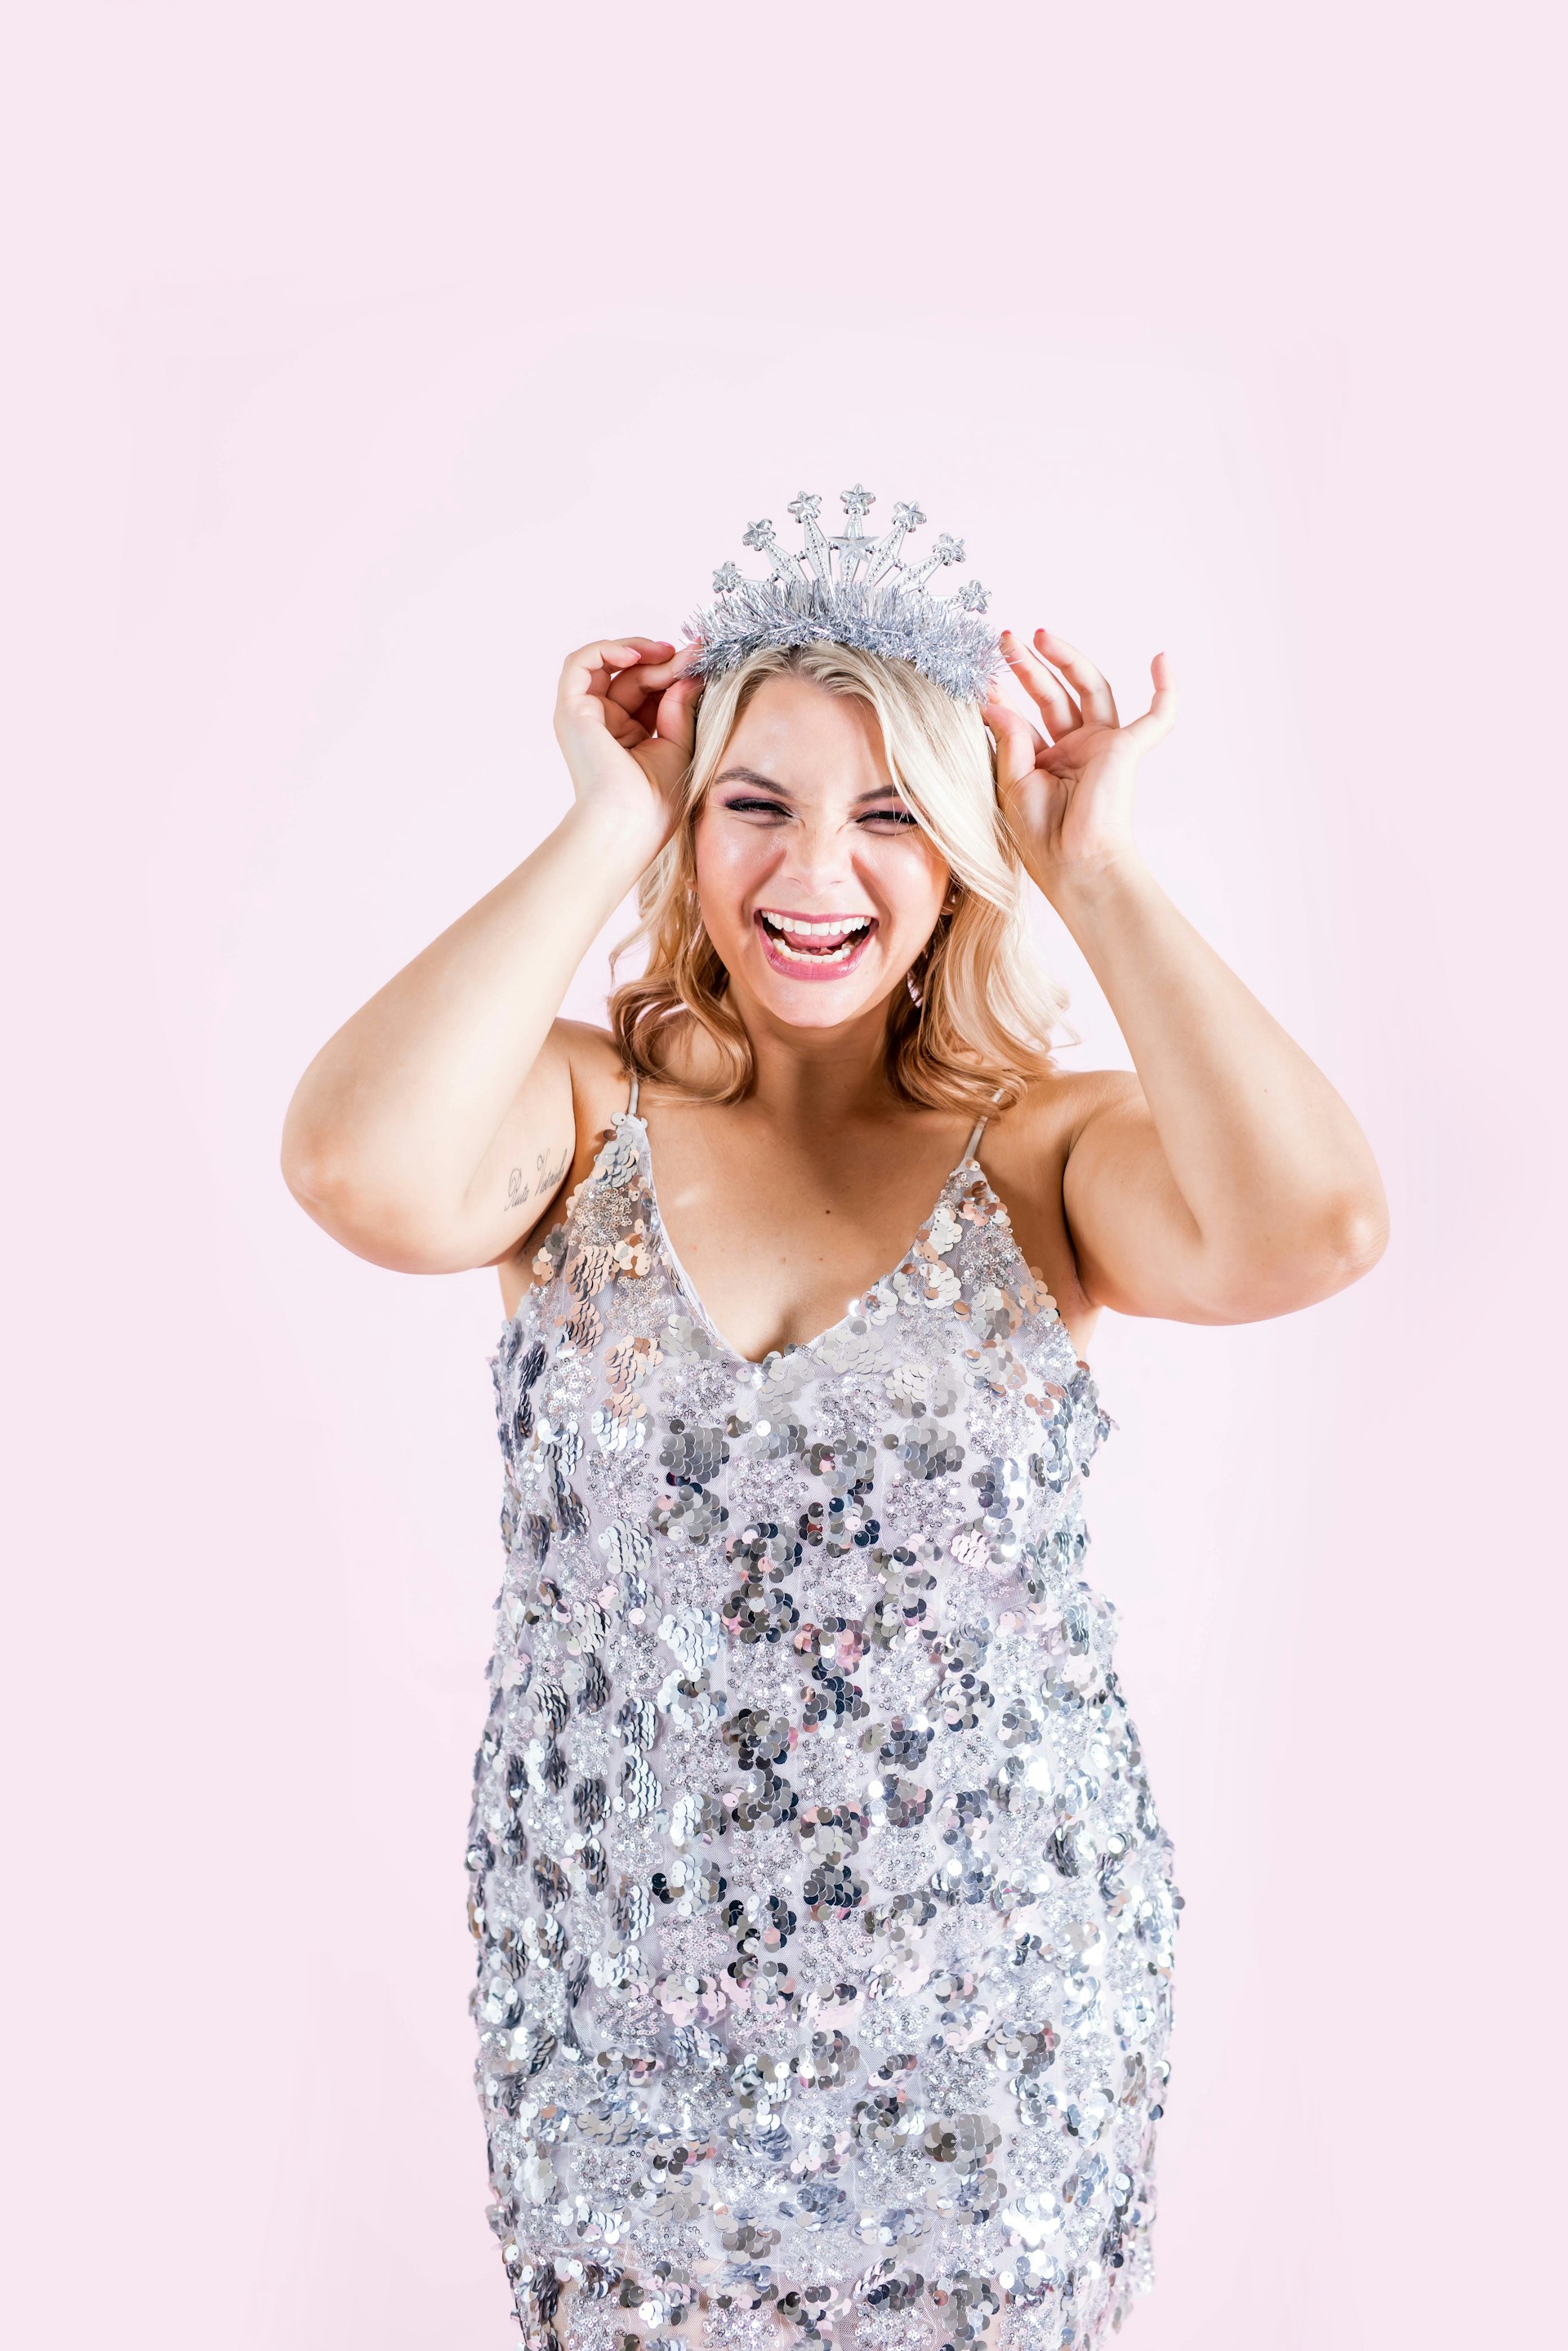 A woman smiling in front of a pink wall wearing a glittery silver dress and holding a crown